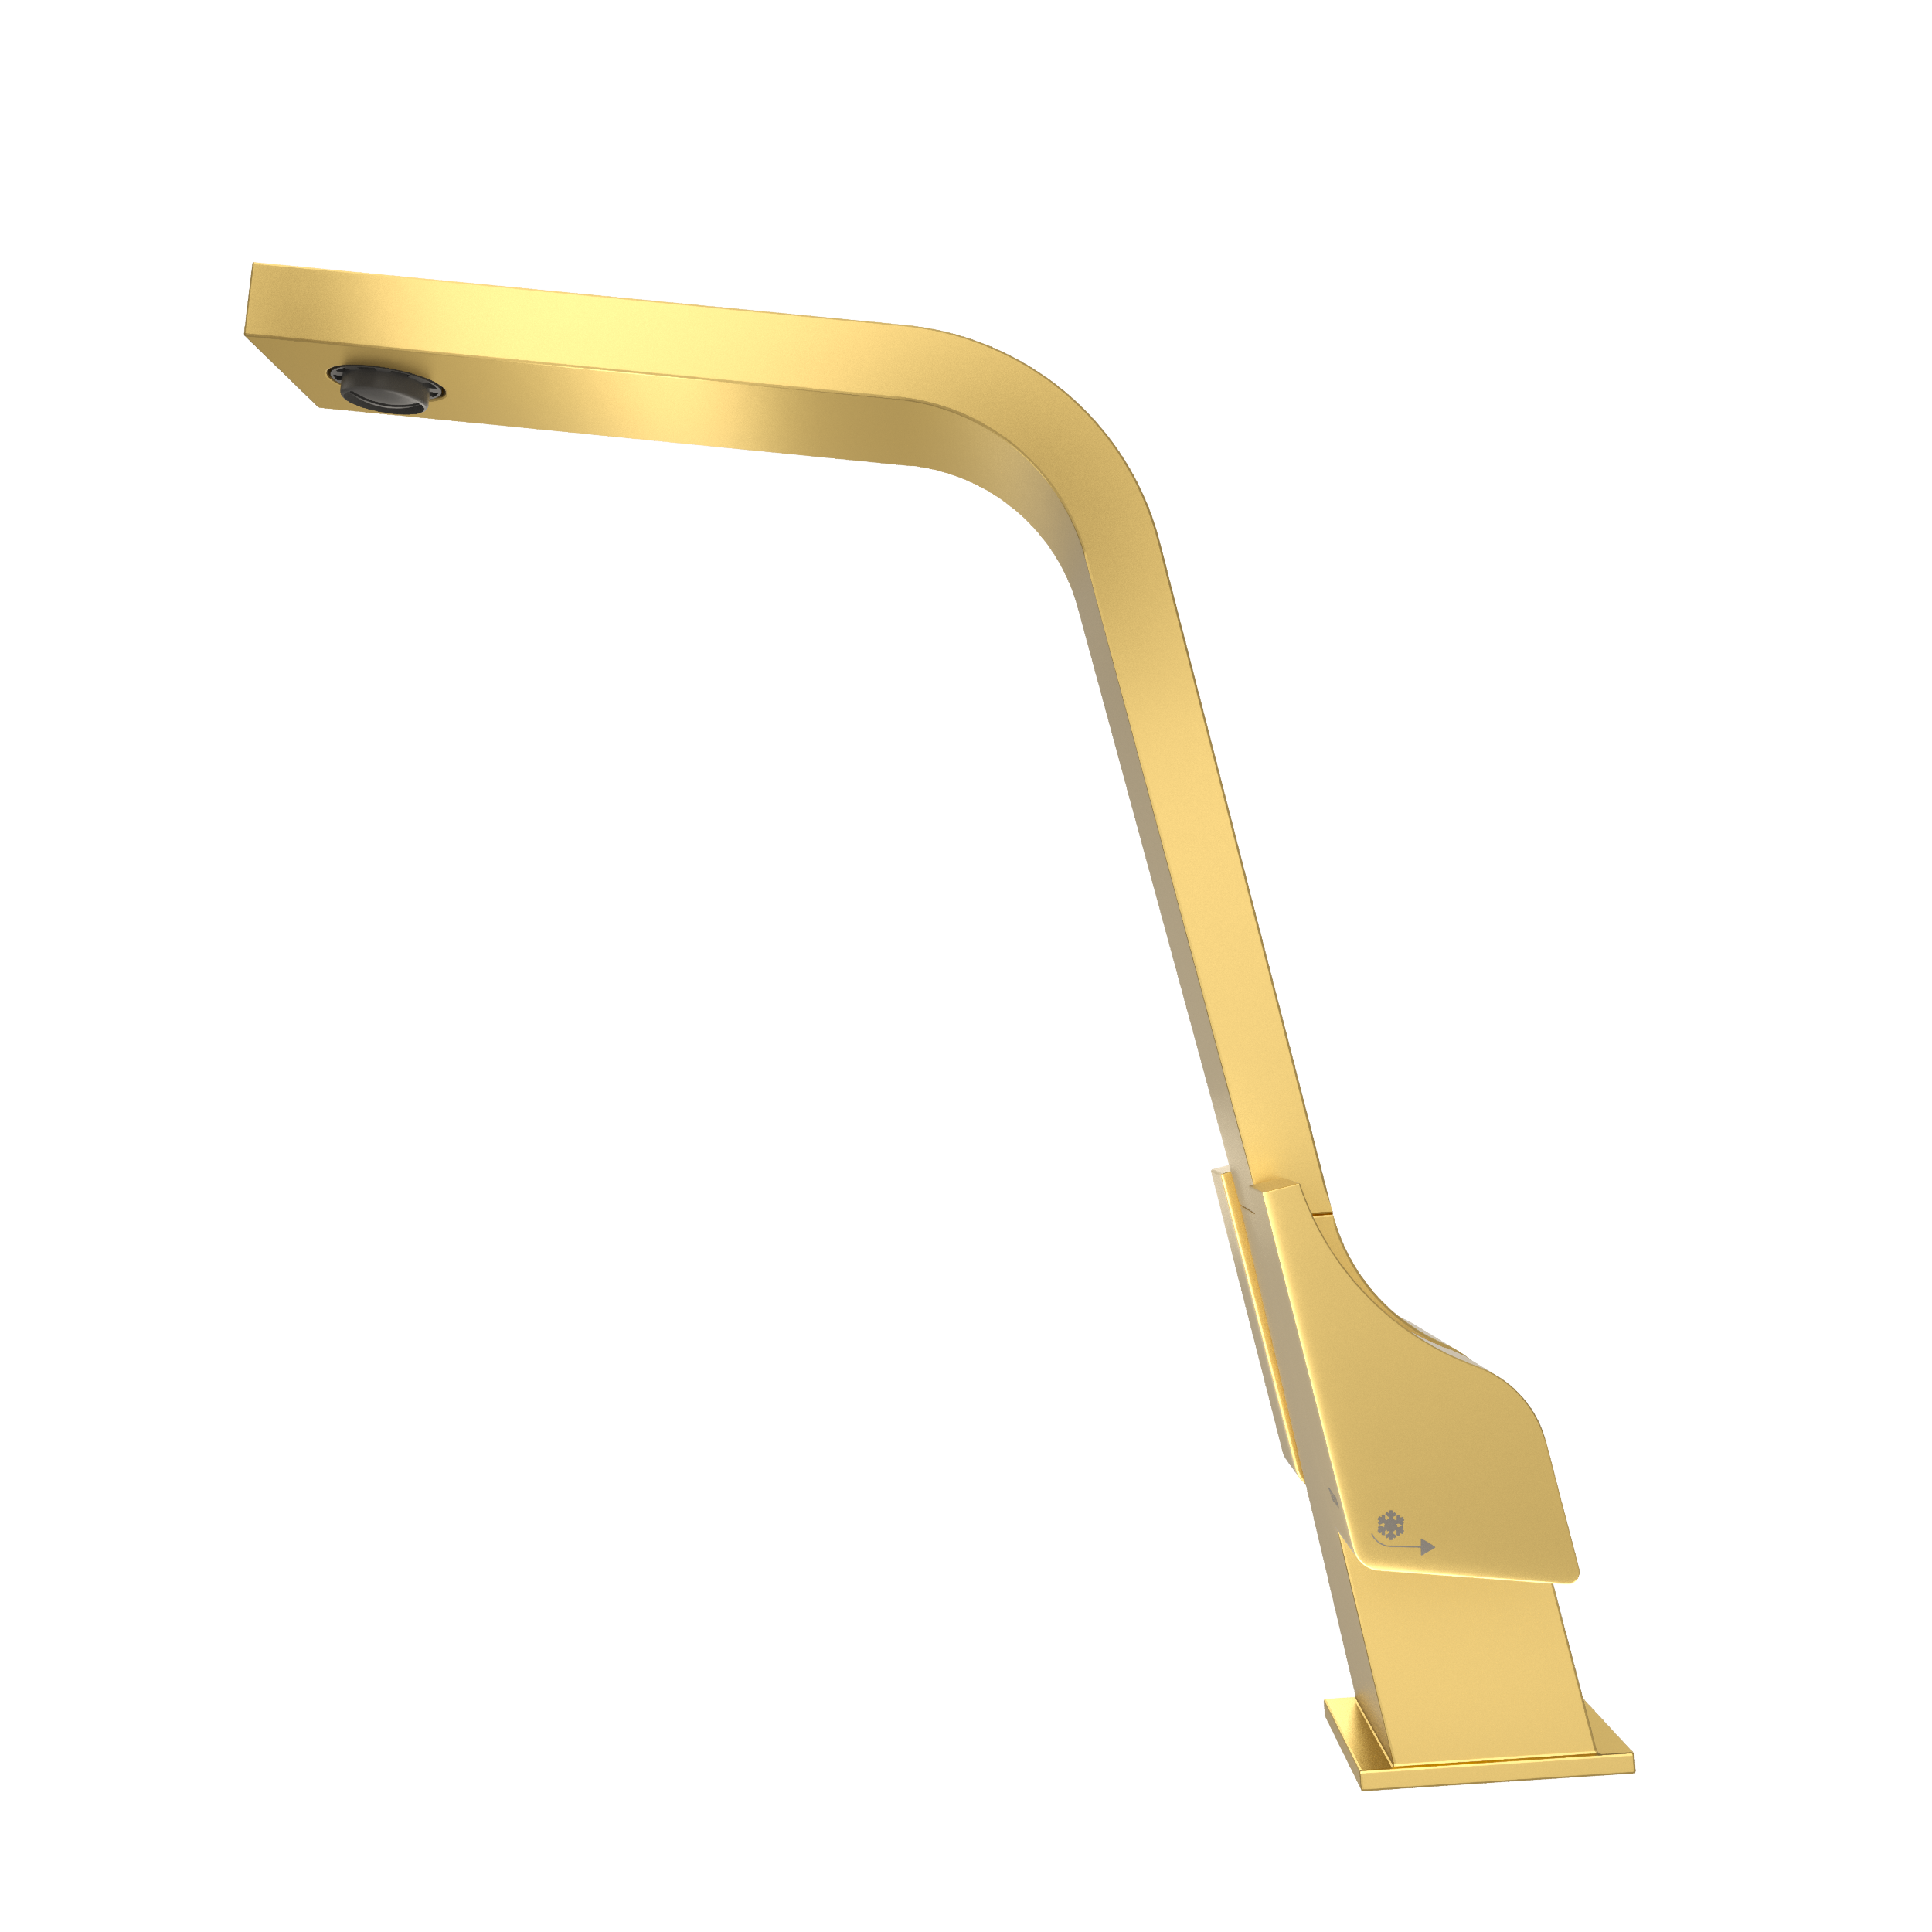 TEKA Brushed Brass Metallic Edition two handles tap with swivel spout